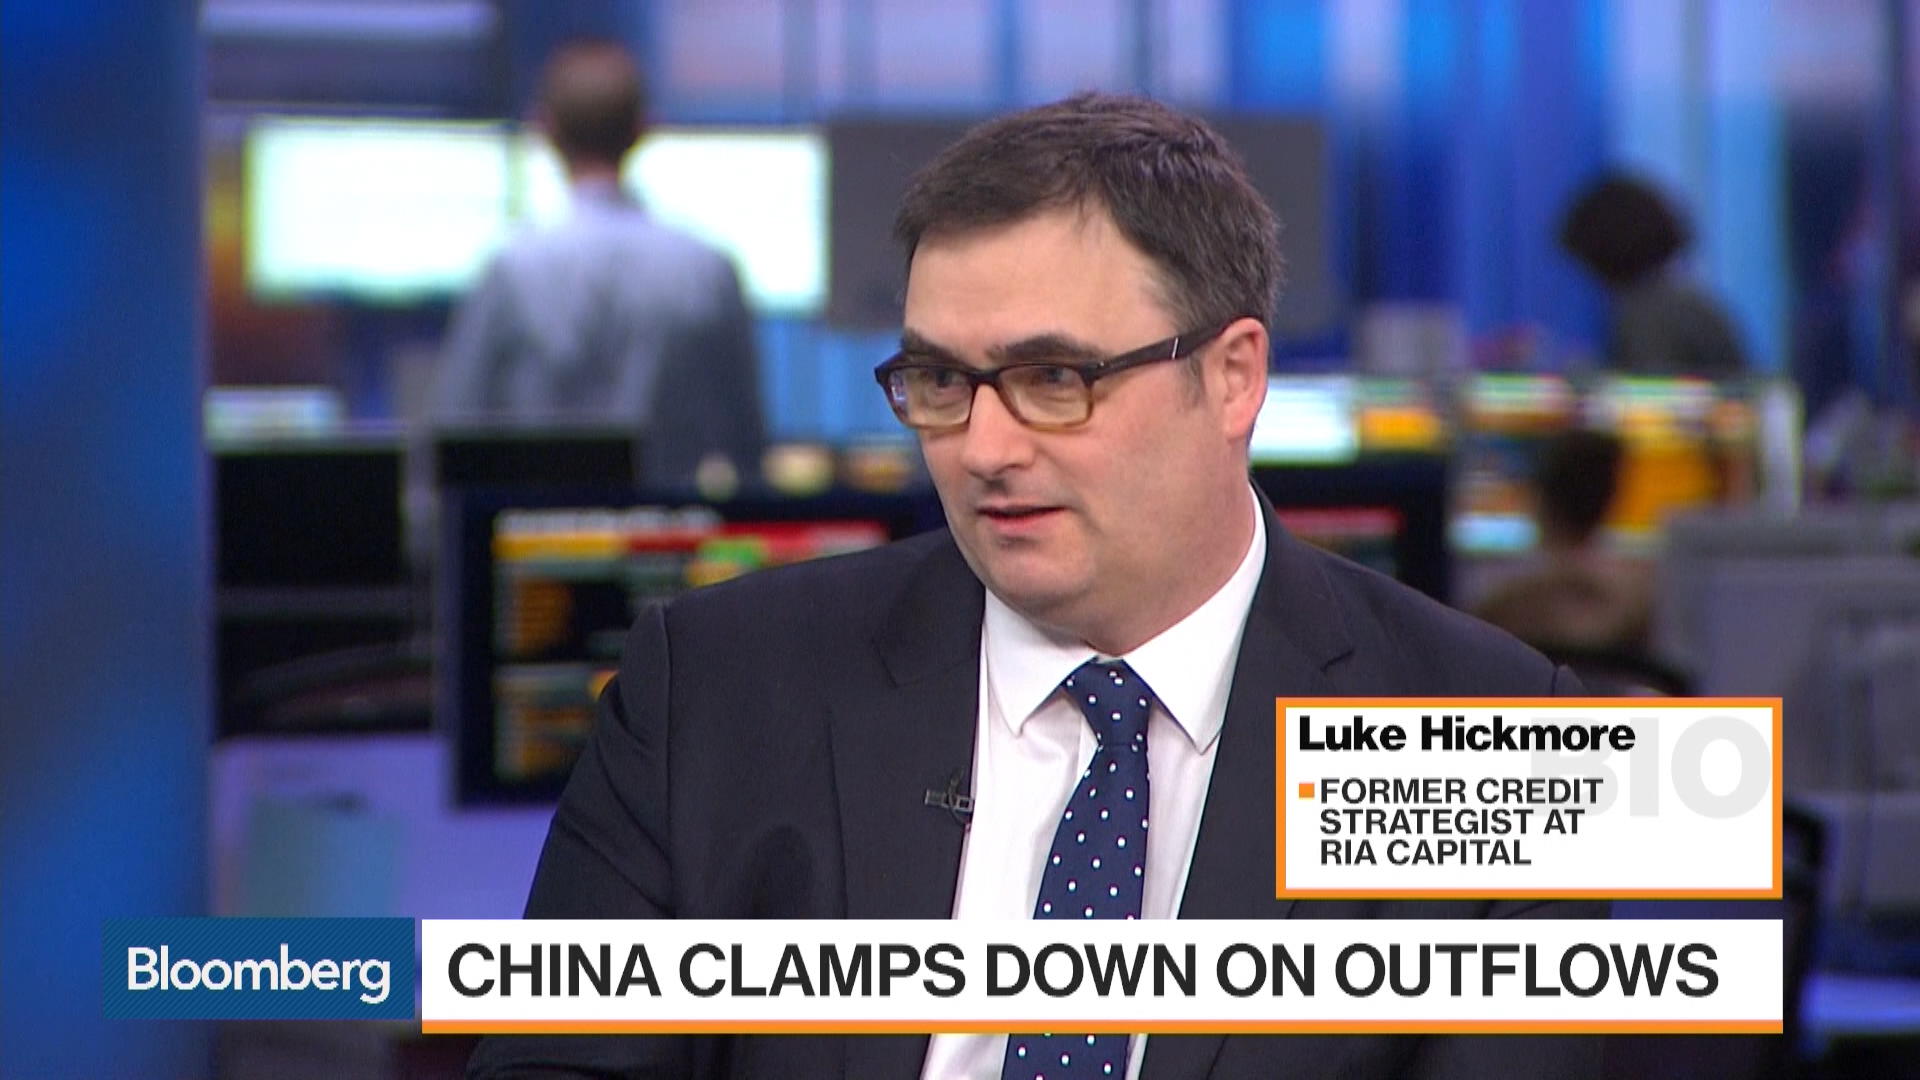 Aberdeen's Hickmore: 2017 Story of Stability for China - Bloomberg